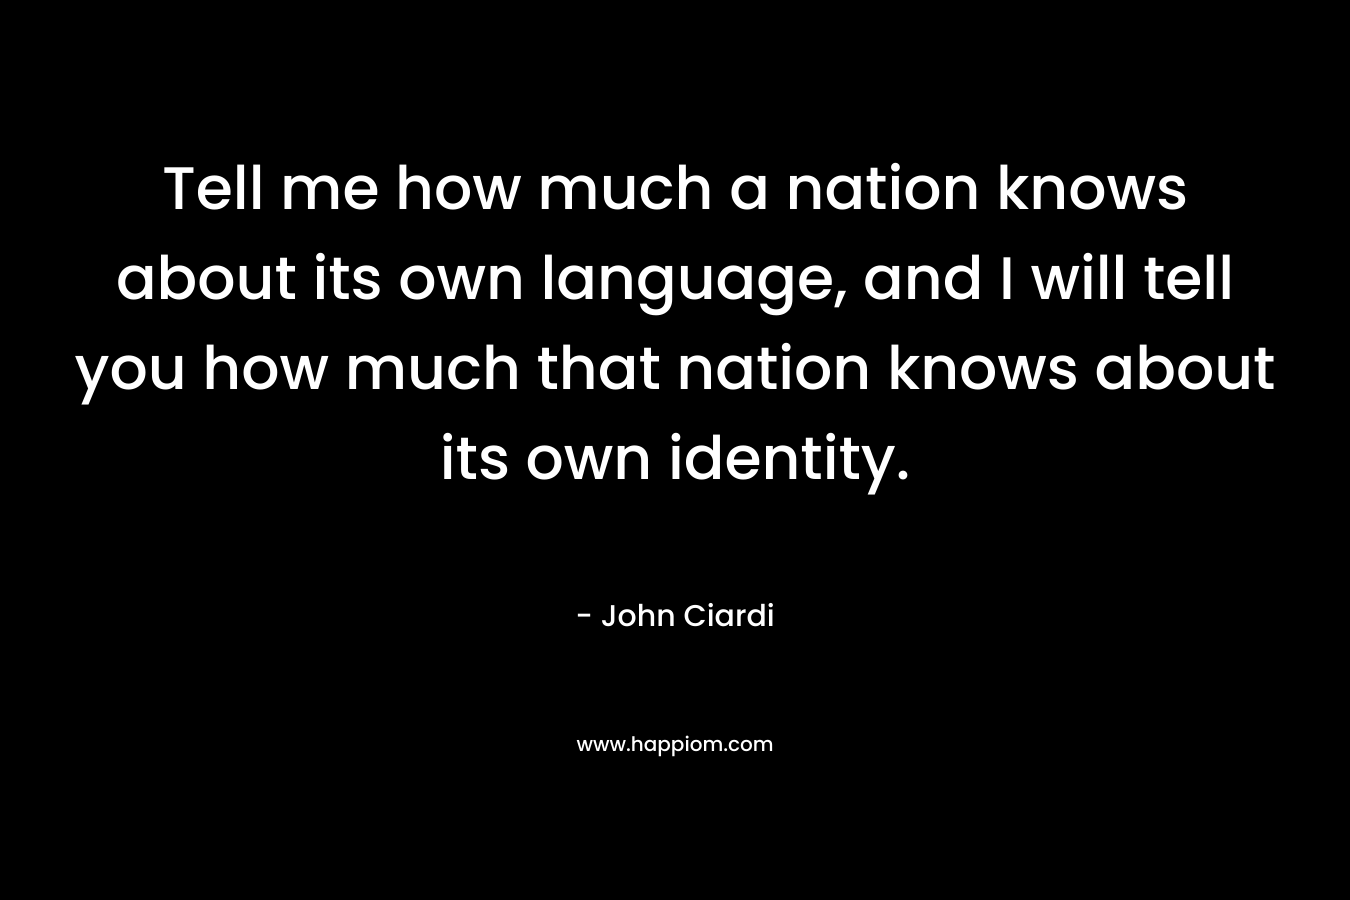 Tell me how much a nation knows about its own language, and I will tell you how much that nation knows about its own identity.